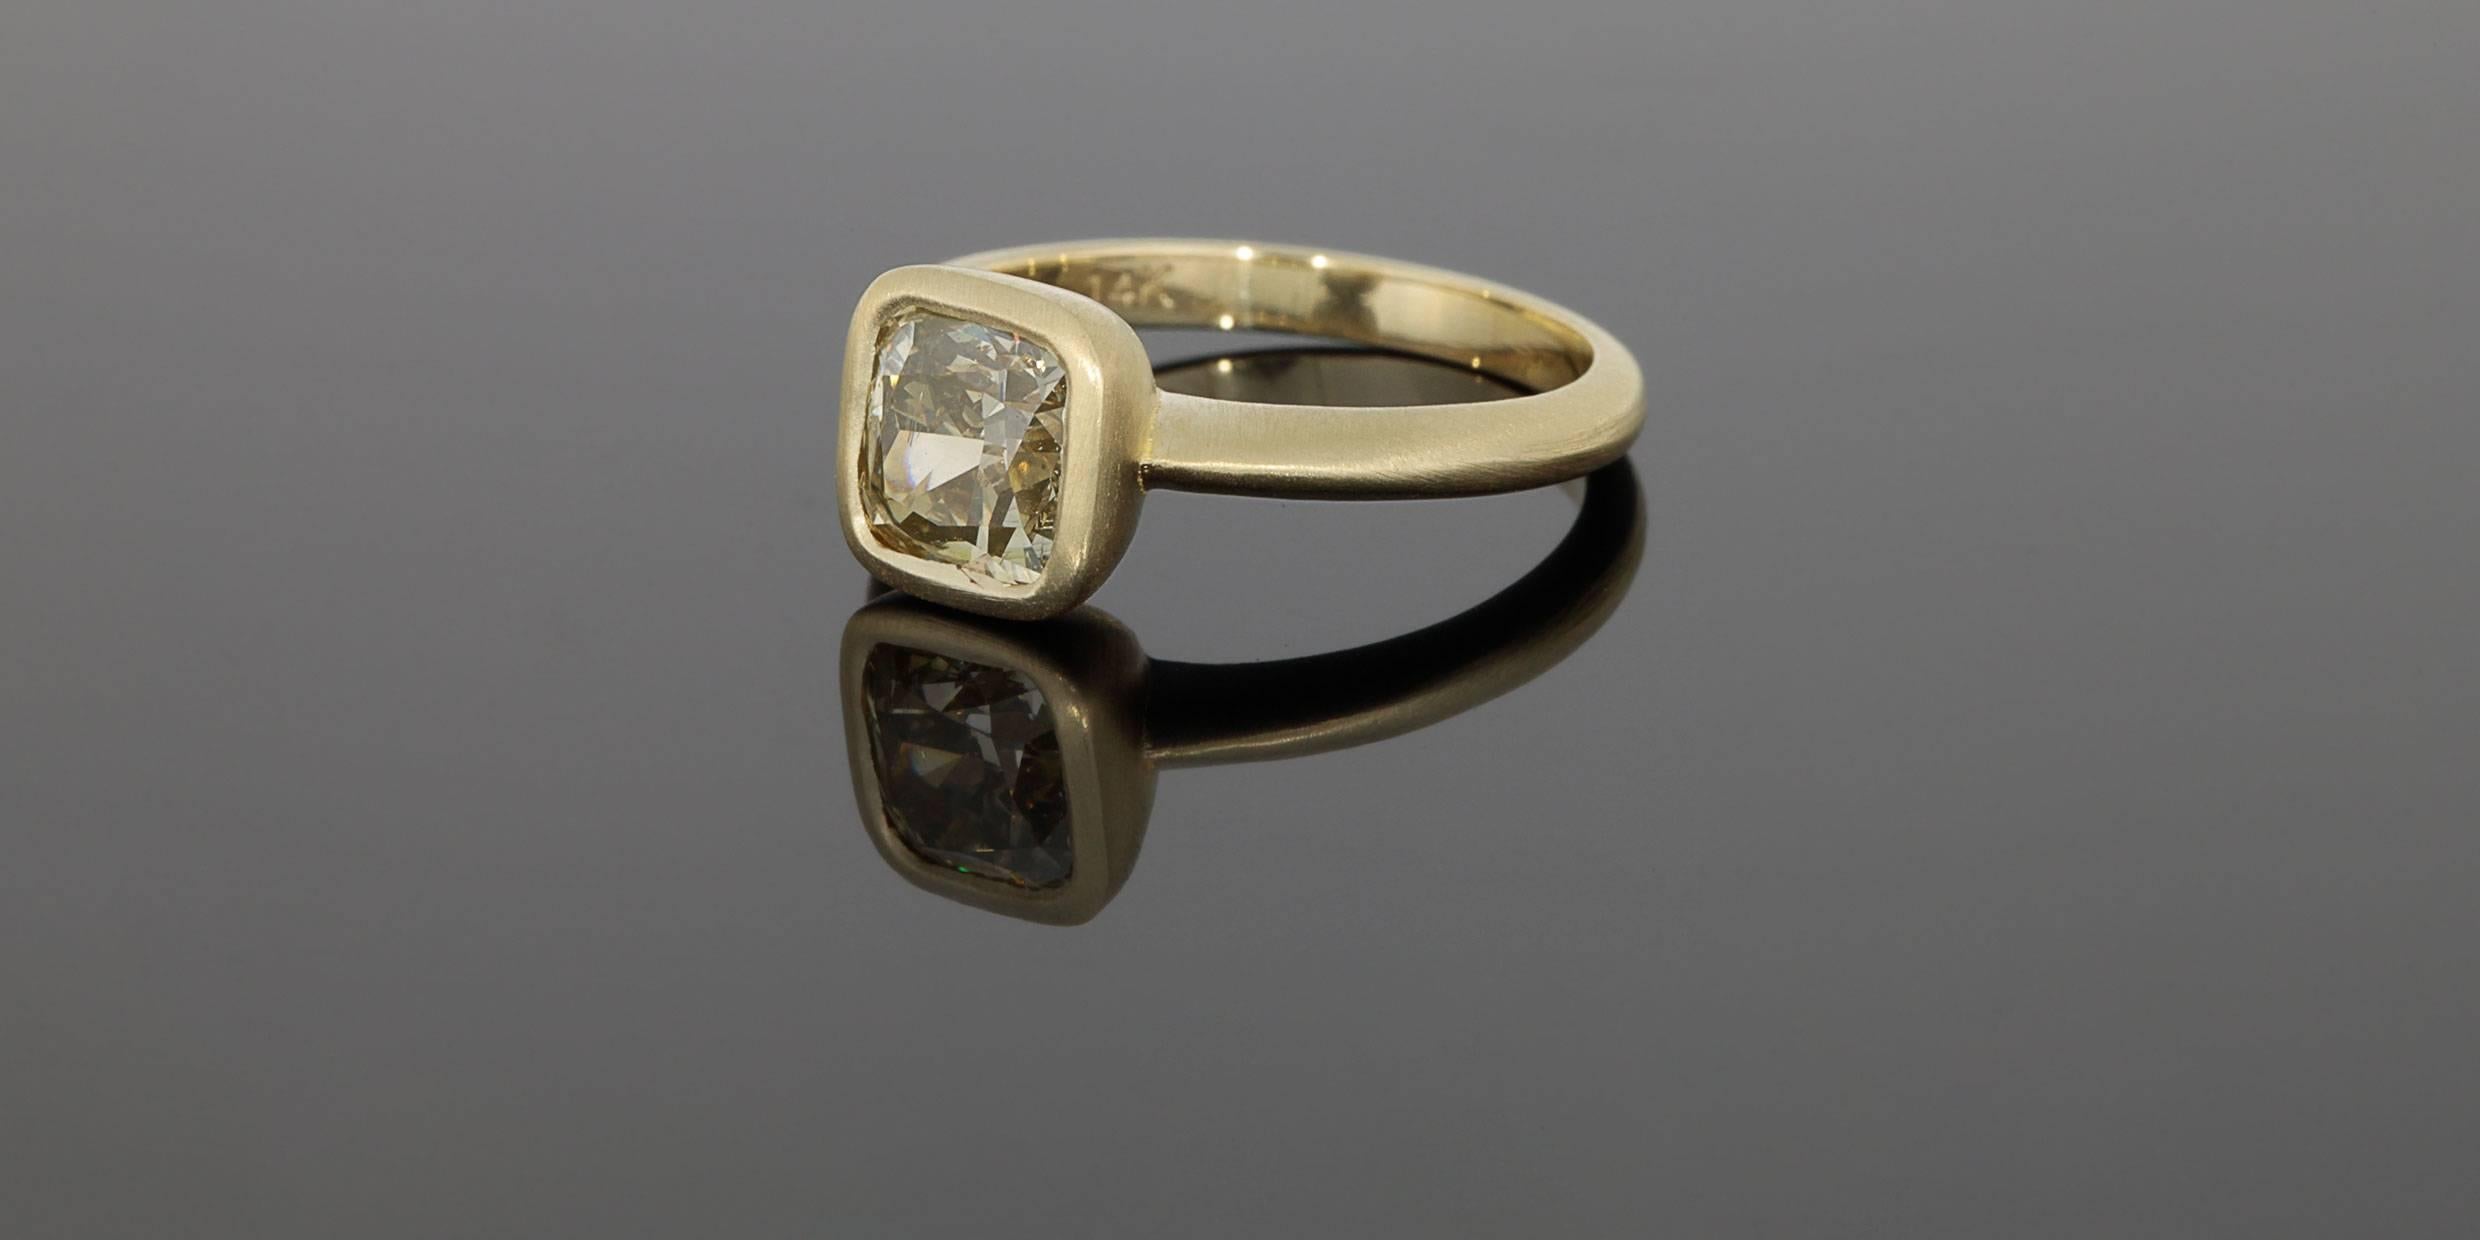 This gorgeous ring features a stunning 1.72 carat fancy yellow, cushion brilliant cut center diamond. This diamond is GIA certified to have natural, even, fancy color. It is a beautiful champagne yellow color, & the diamond is very well cut. The